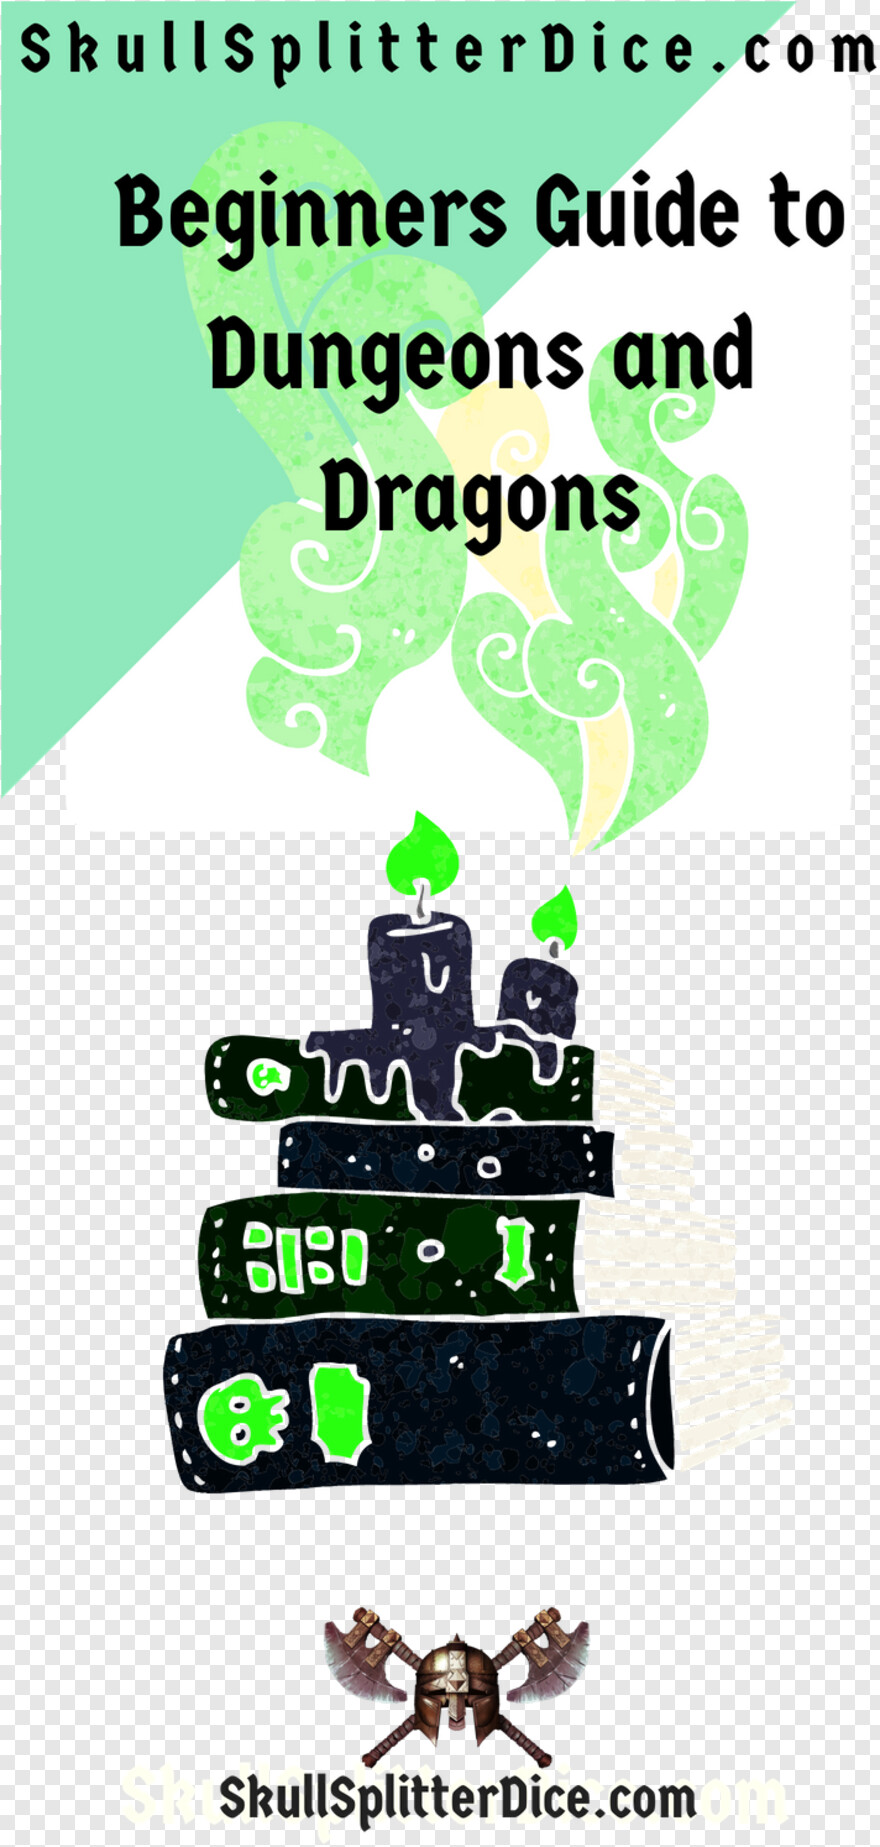 dungeons-and-dragons-logo # 521902